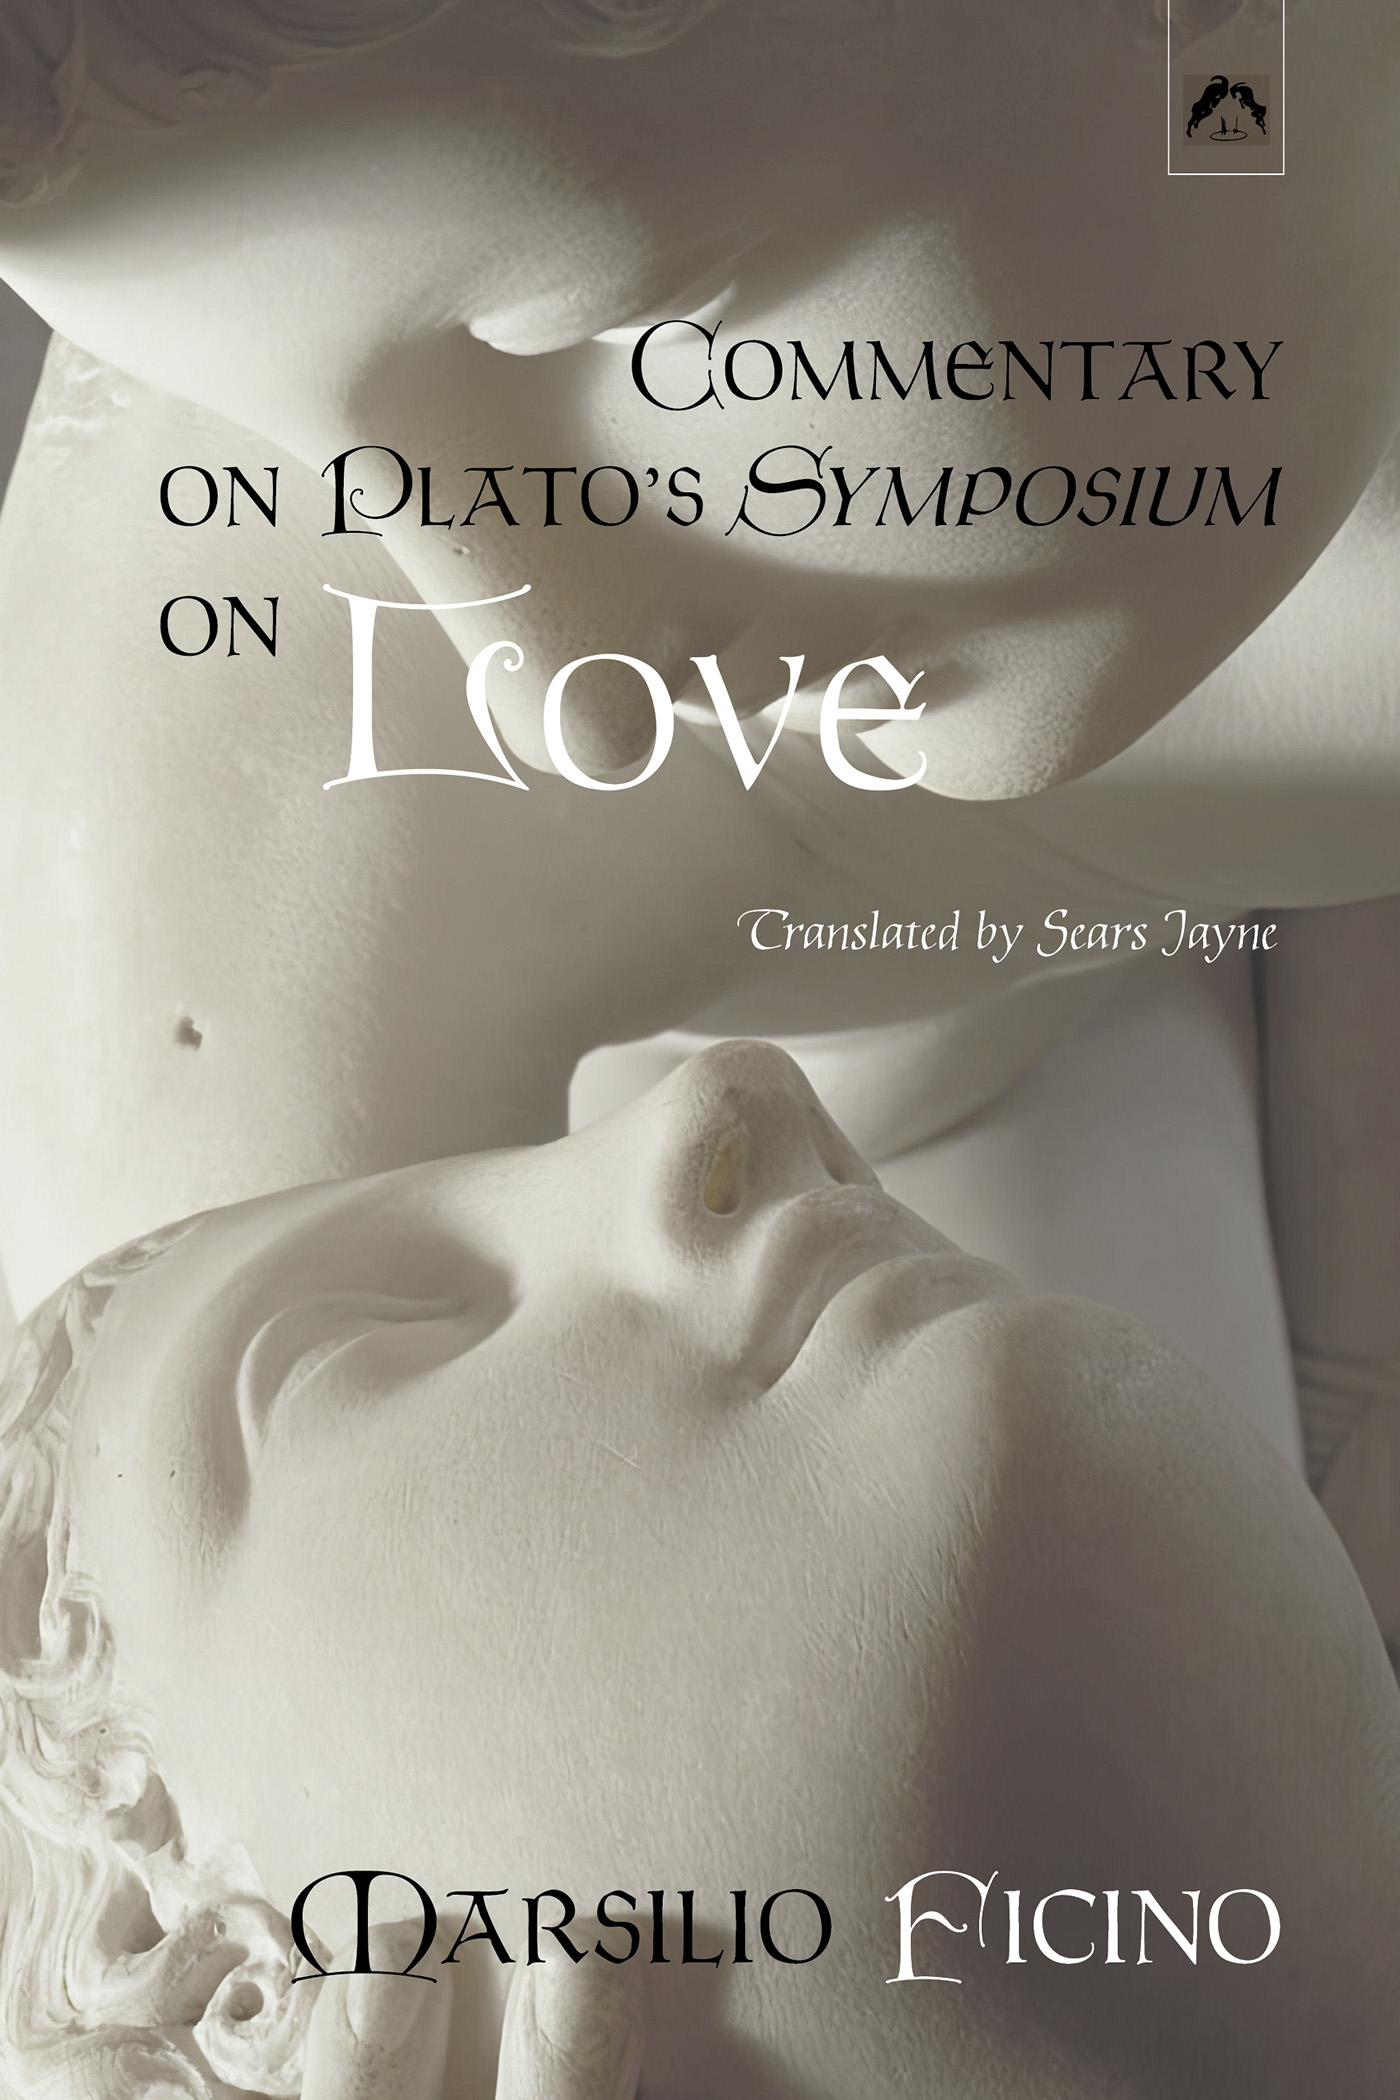 Cover art featuring Canova’s Psyche Revived by Cupid’s Kiss